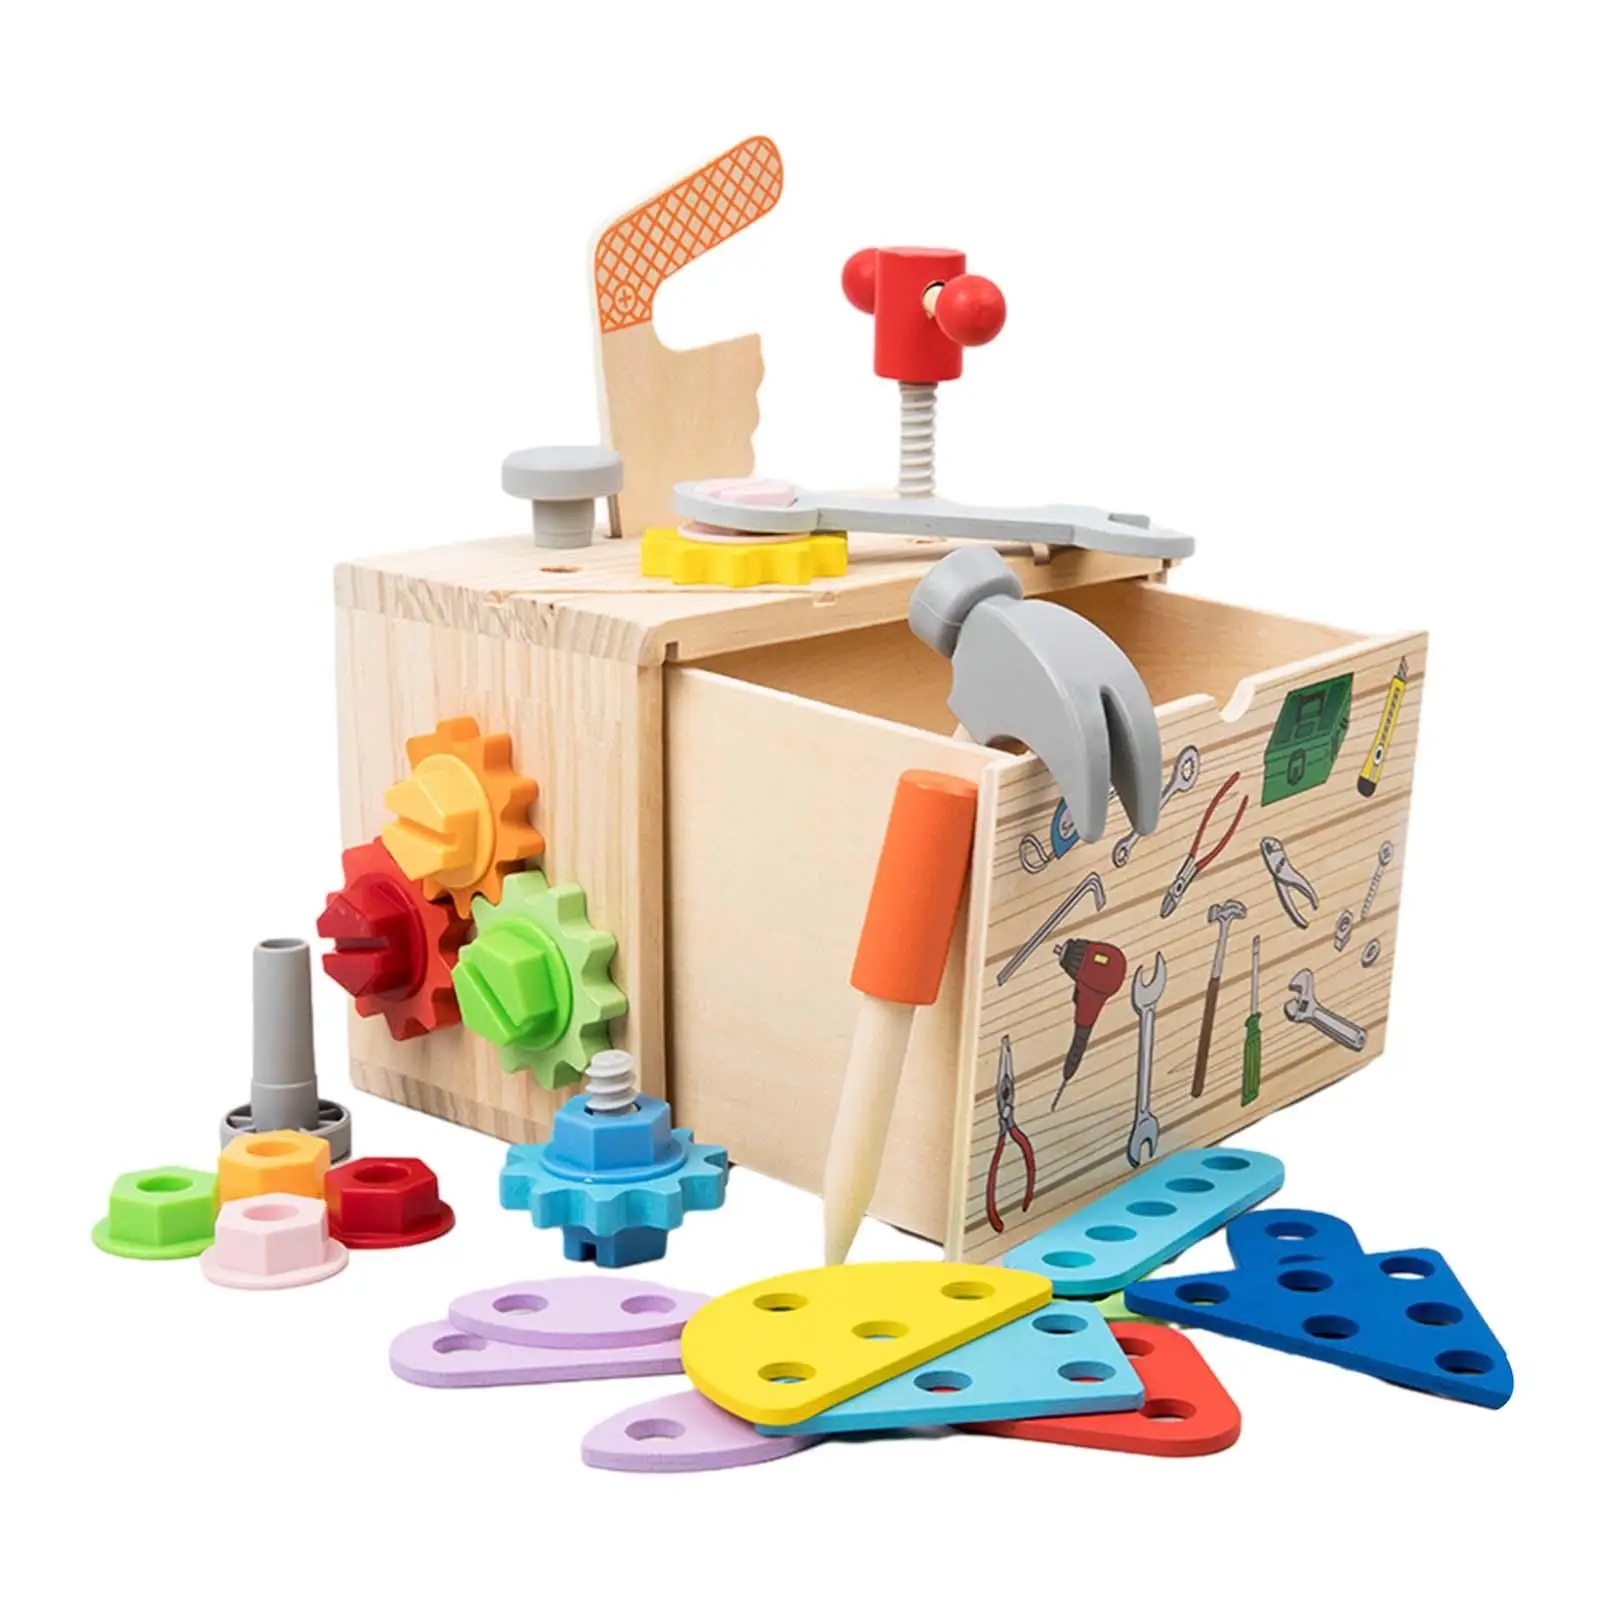 Wooden Toolbox Toy Nuts and Bolts Screws Creative Kid Play Tool Set for 2 3 4 5 Years Old Toddlers Holiday Christmas Birthday